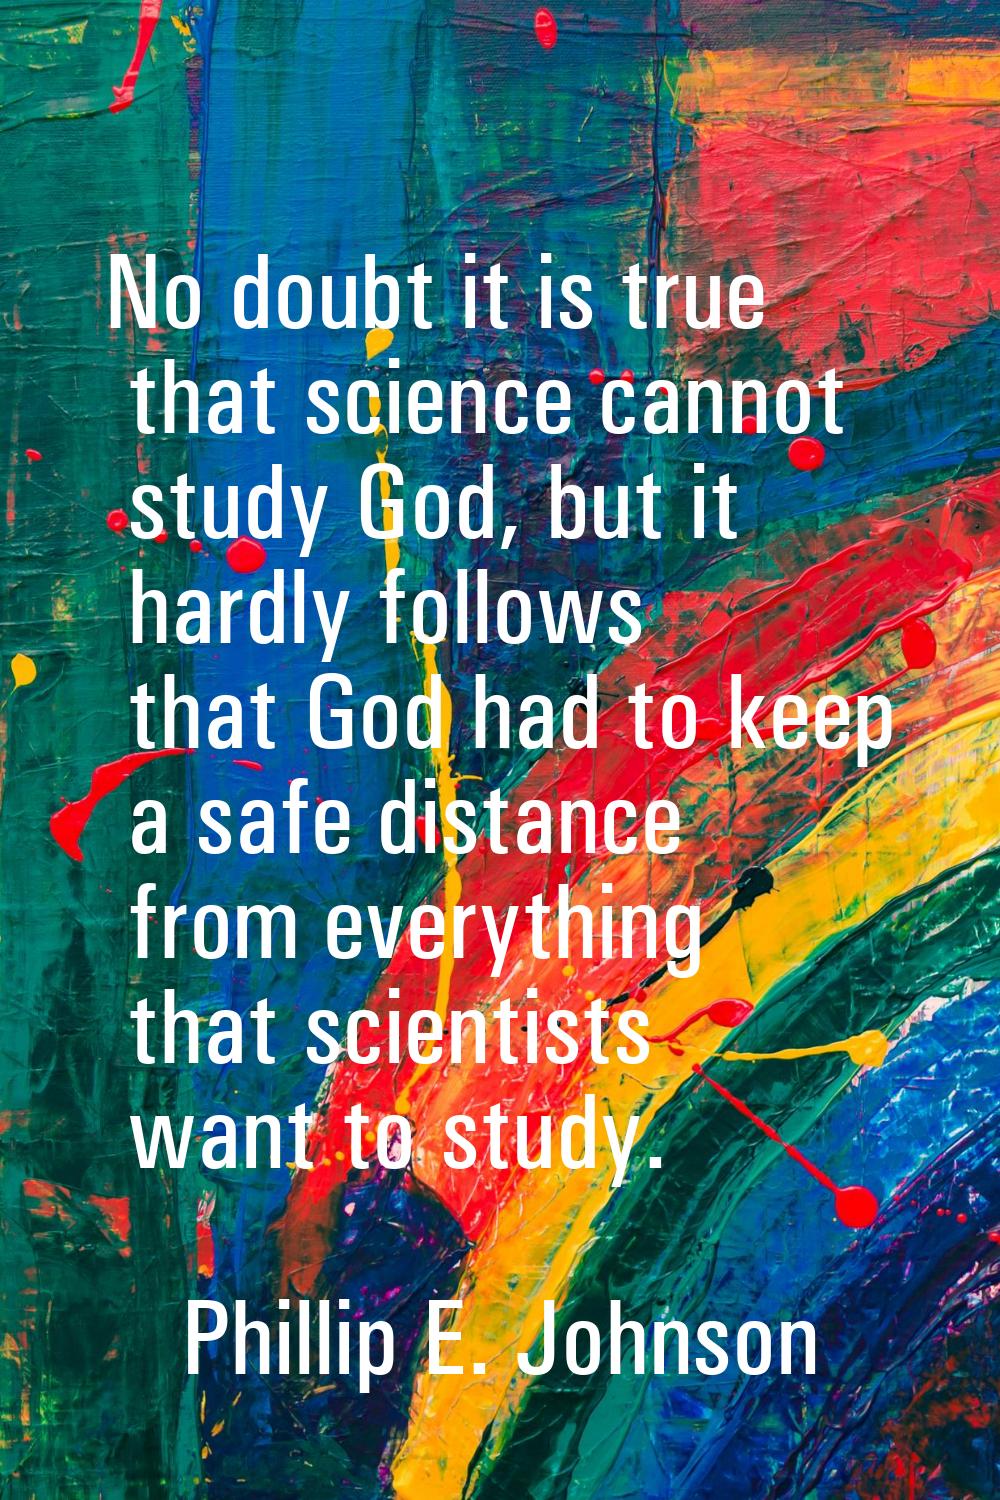 No doubt it is true that science cannot study God, but it hardly follows that God had to keep a saf